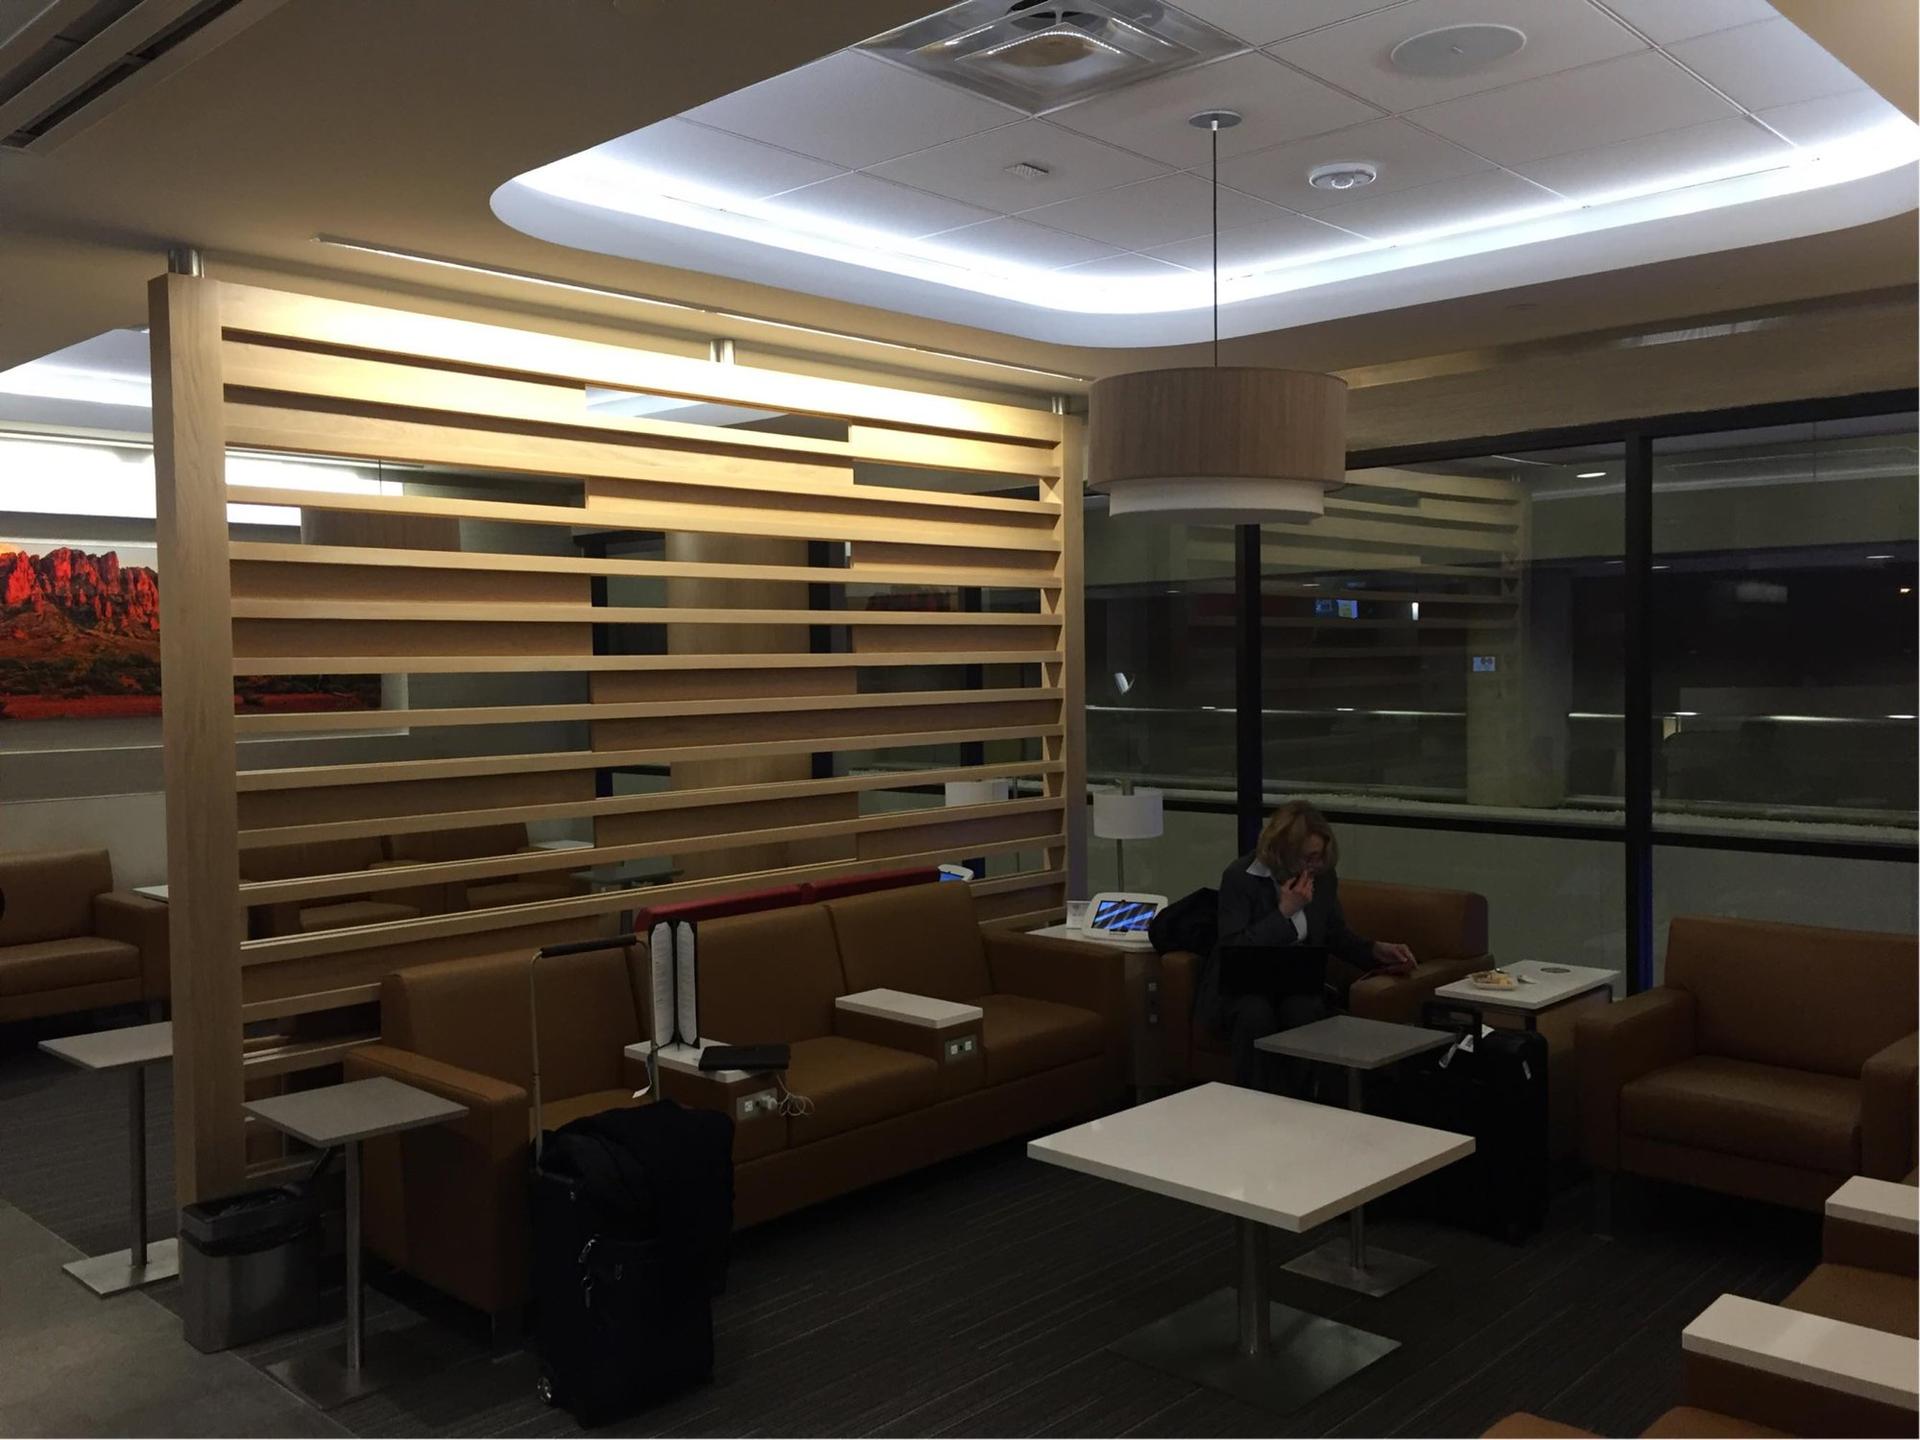 American Airlines Admirals Club (Gate A7) image 24 of 25